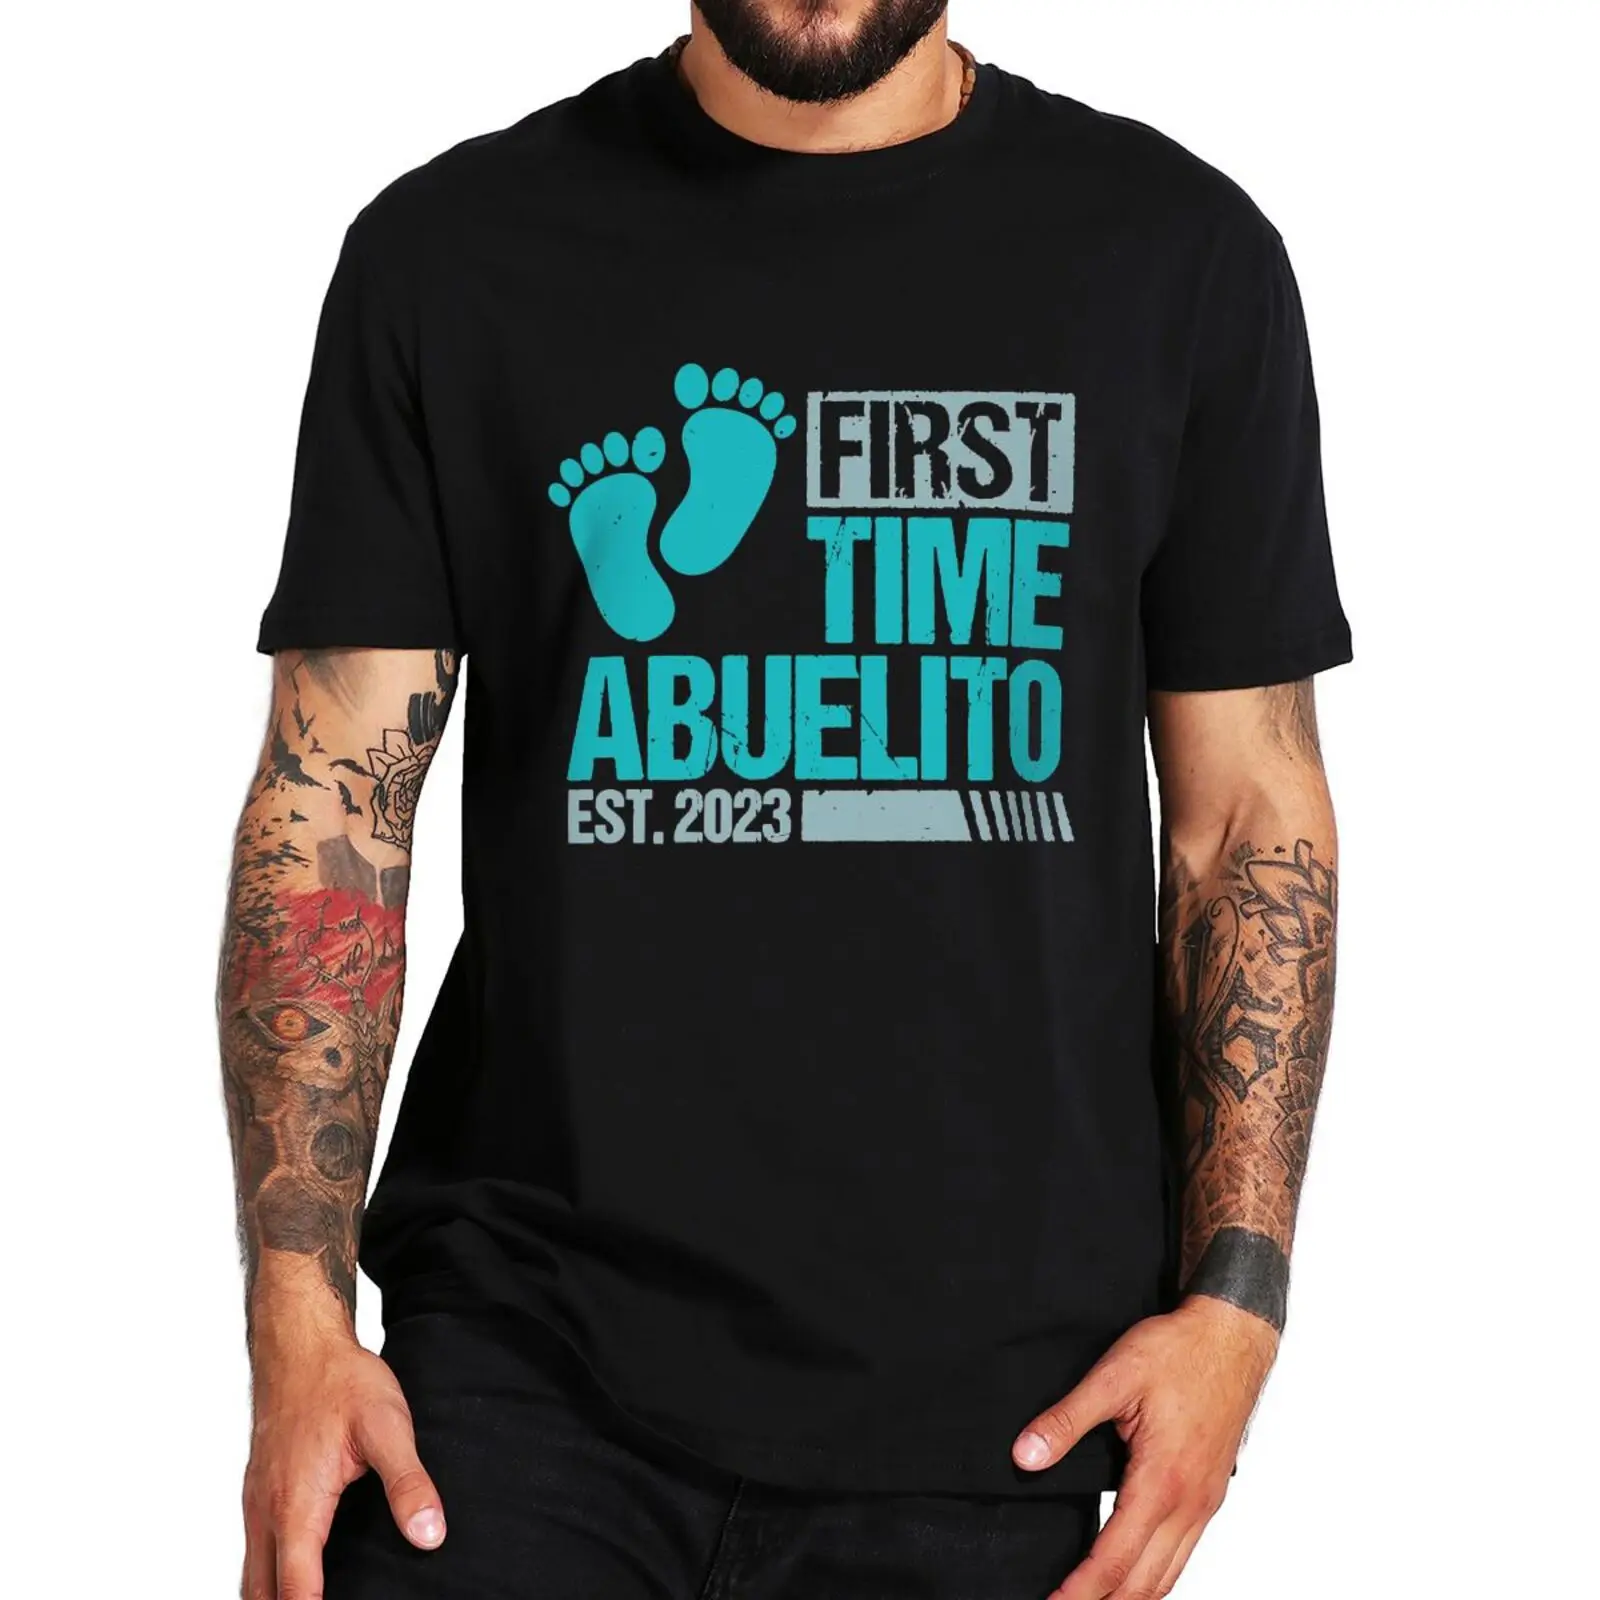 

First Time Abuelito 2023 T Shirt Vintage Grandpa Dad Gift Short Sleeve 100% Cotton Unisex Casual Soft T-shirt EU Size